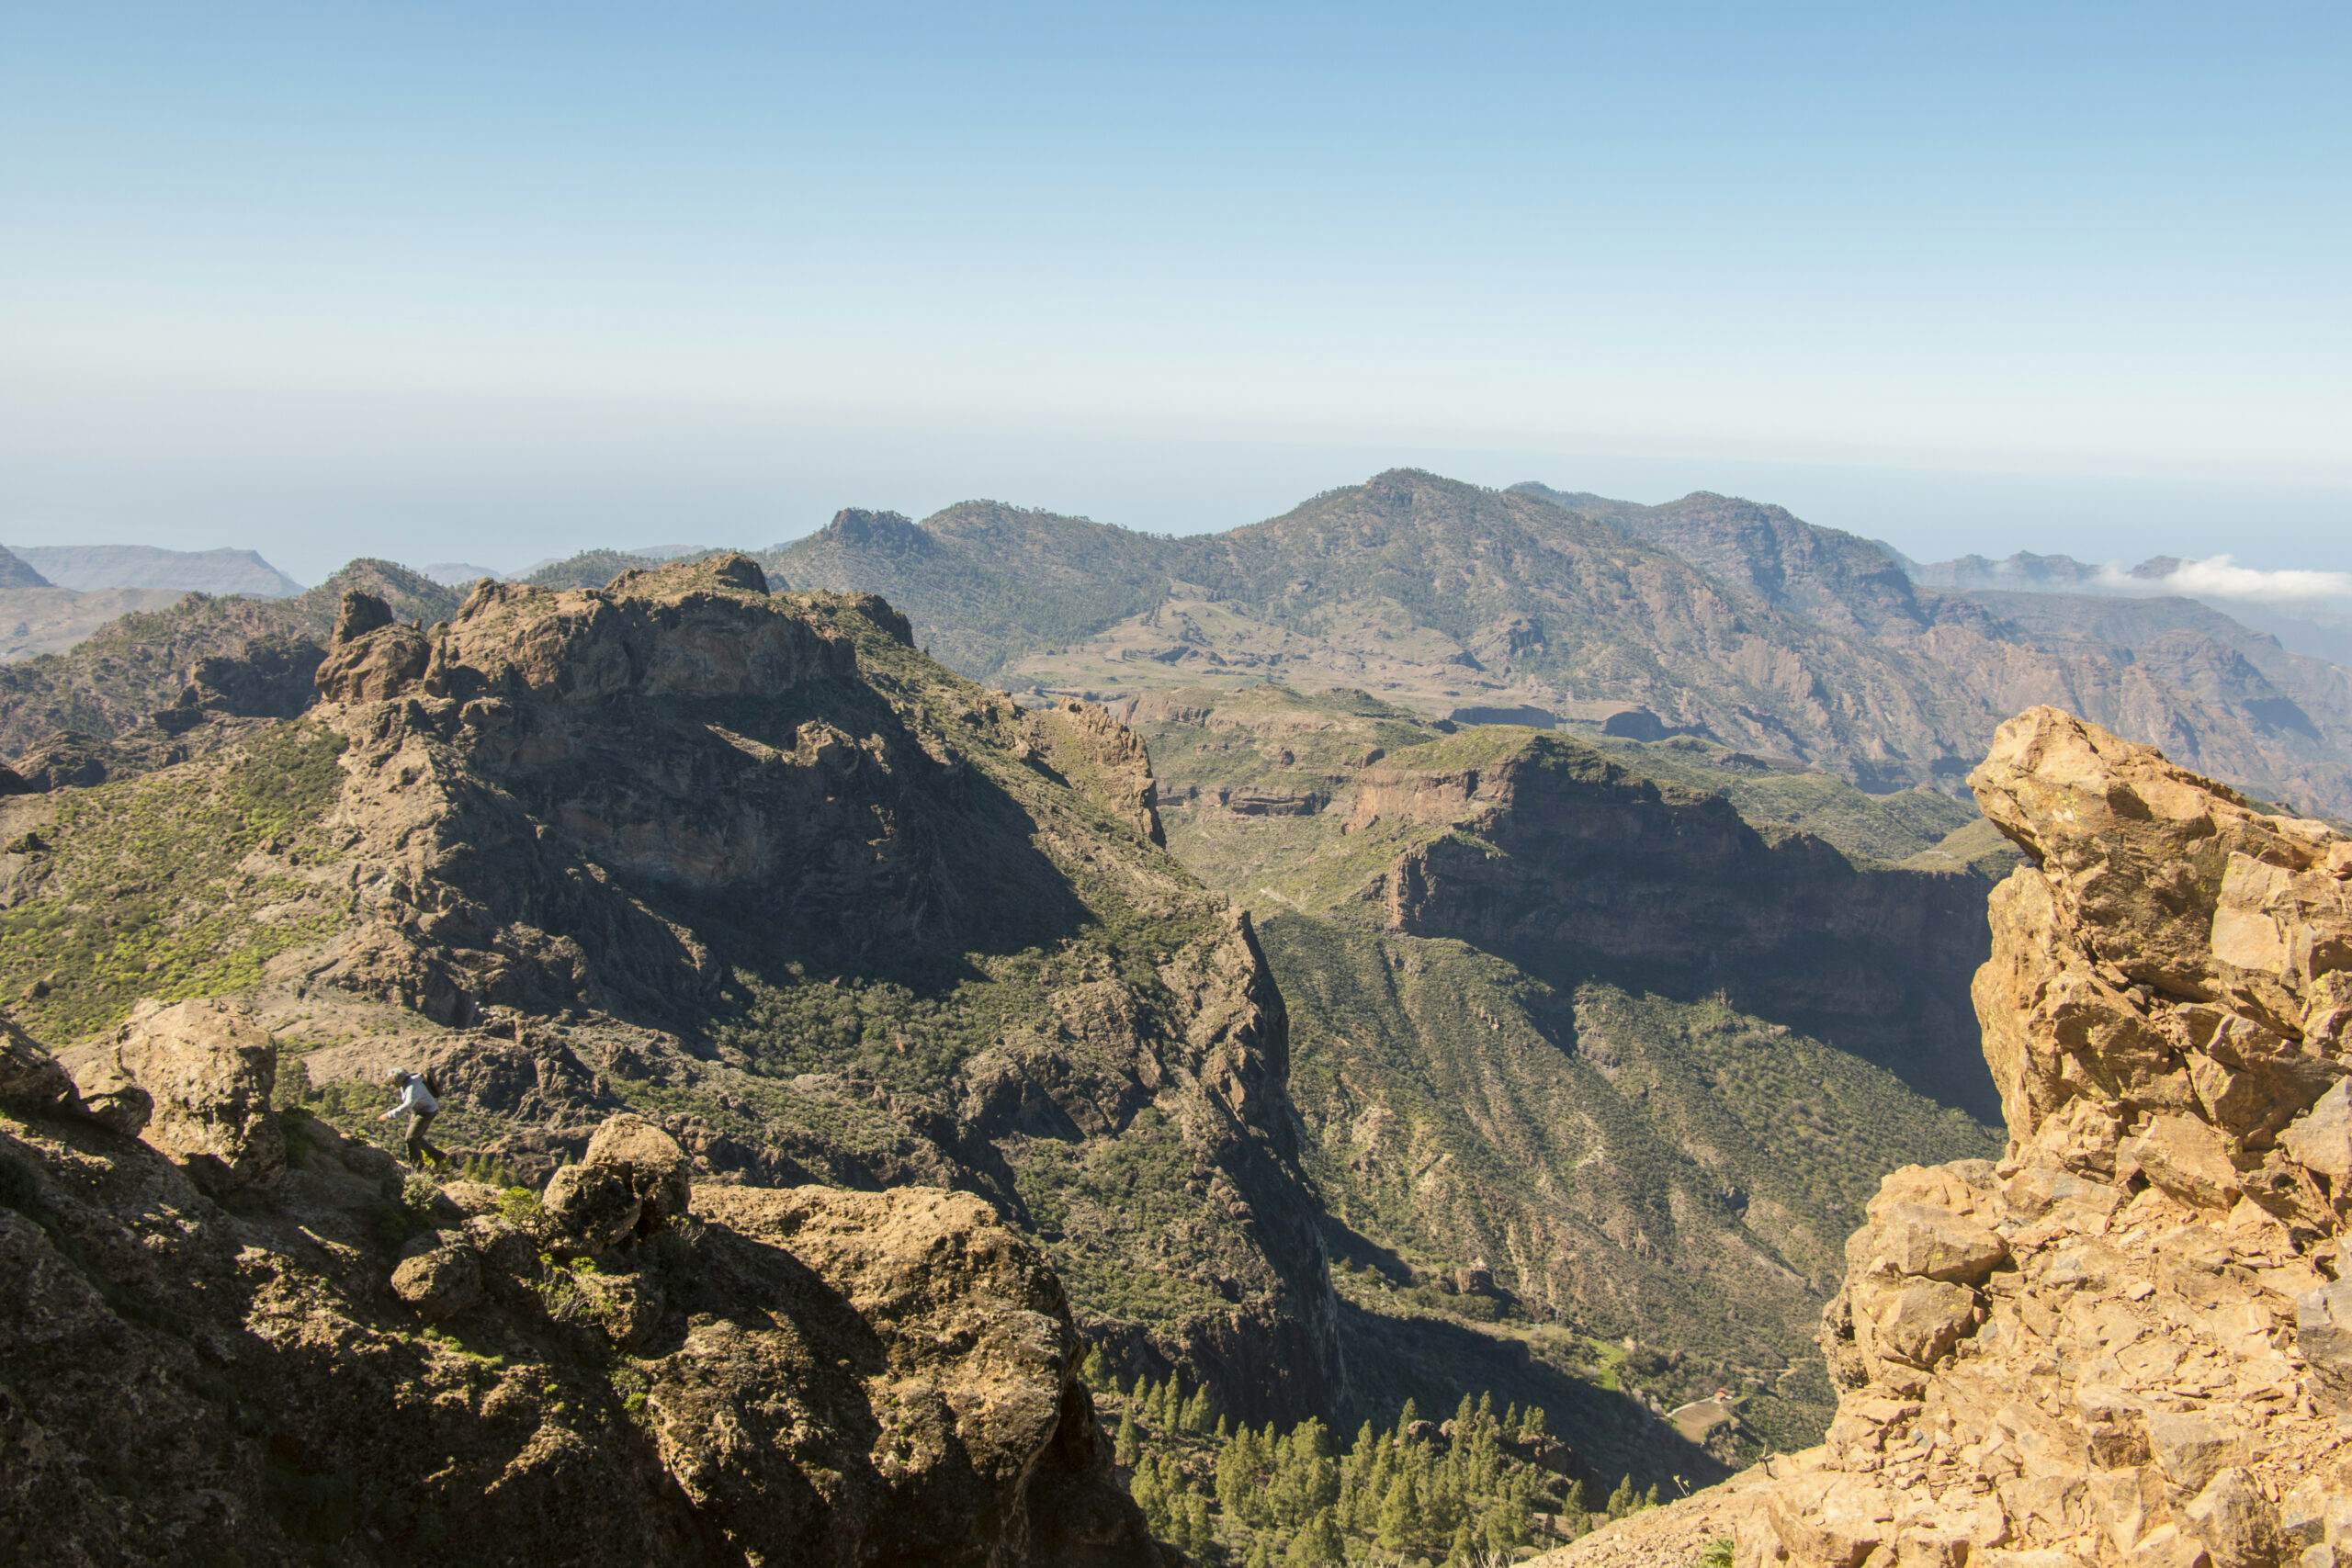 View from the Roque Nublo hiking trail towards the west